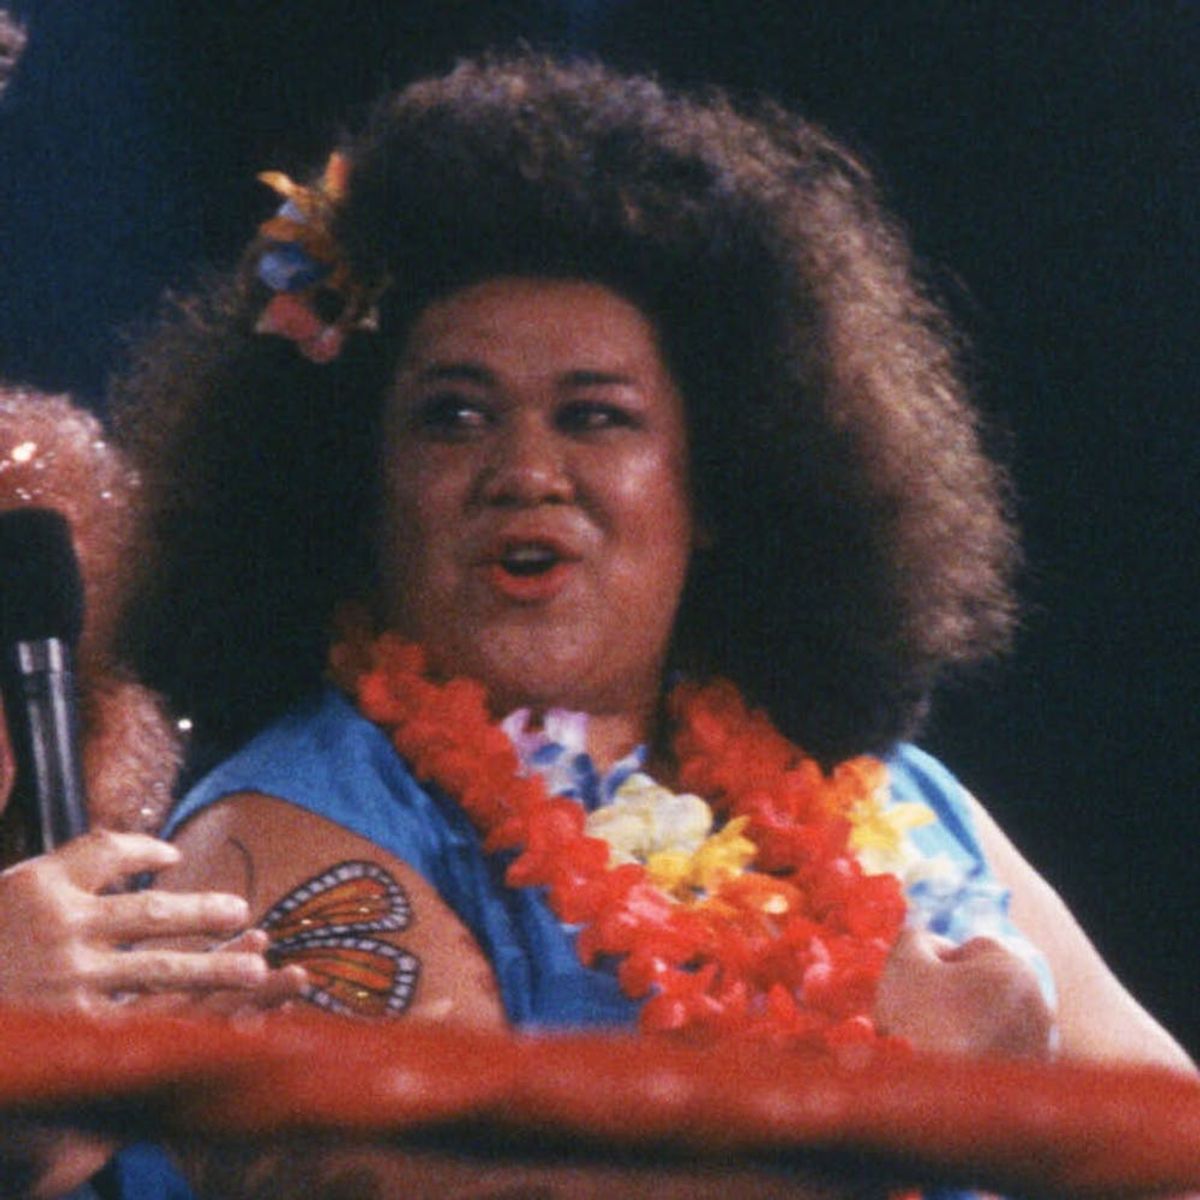 Beloved IRL ‘G.L.O.W.’ Wrestler Mountain Fiji Has Died at Age 60